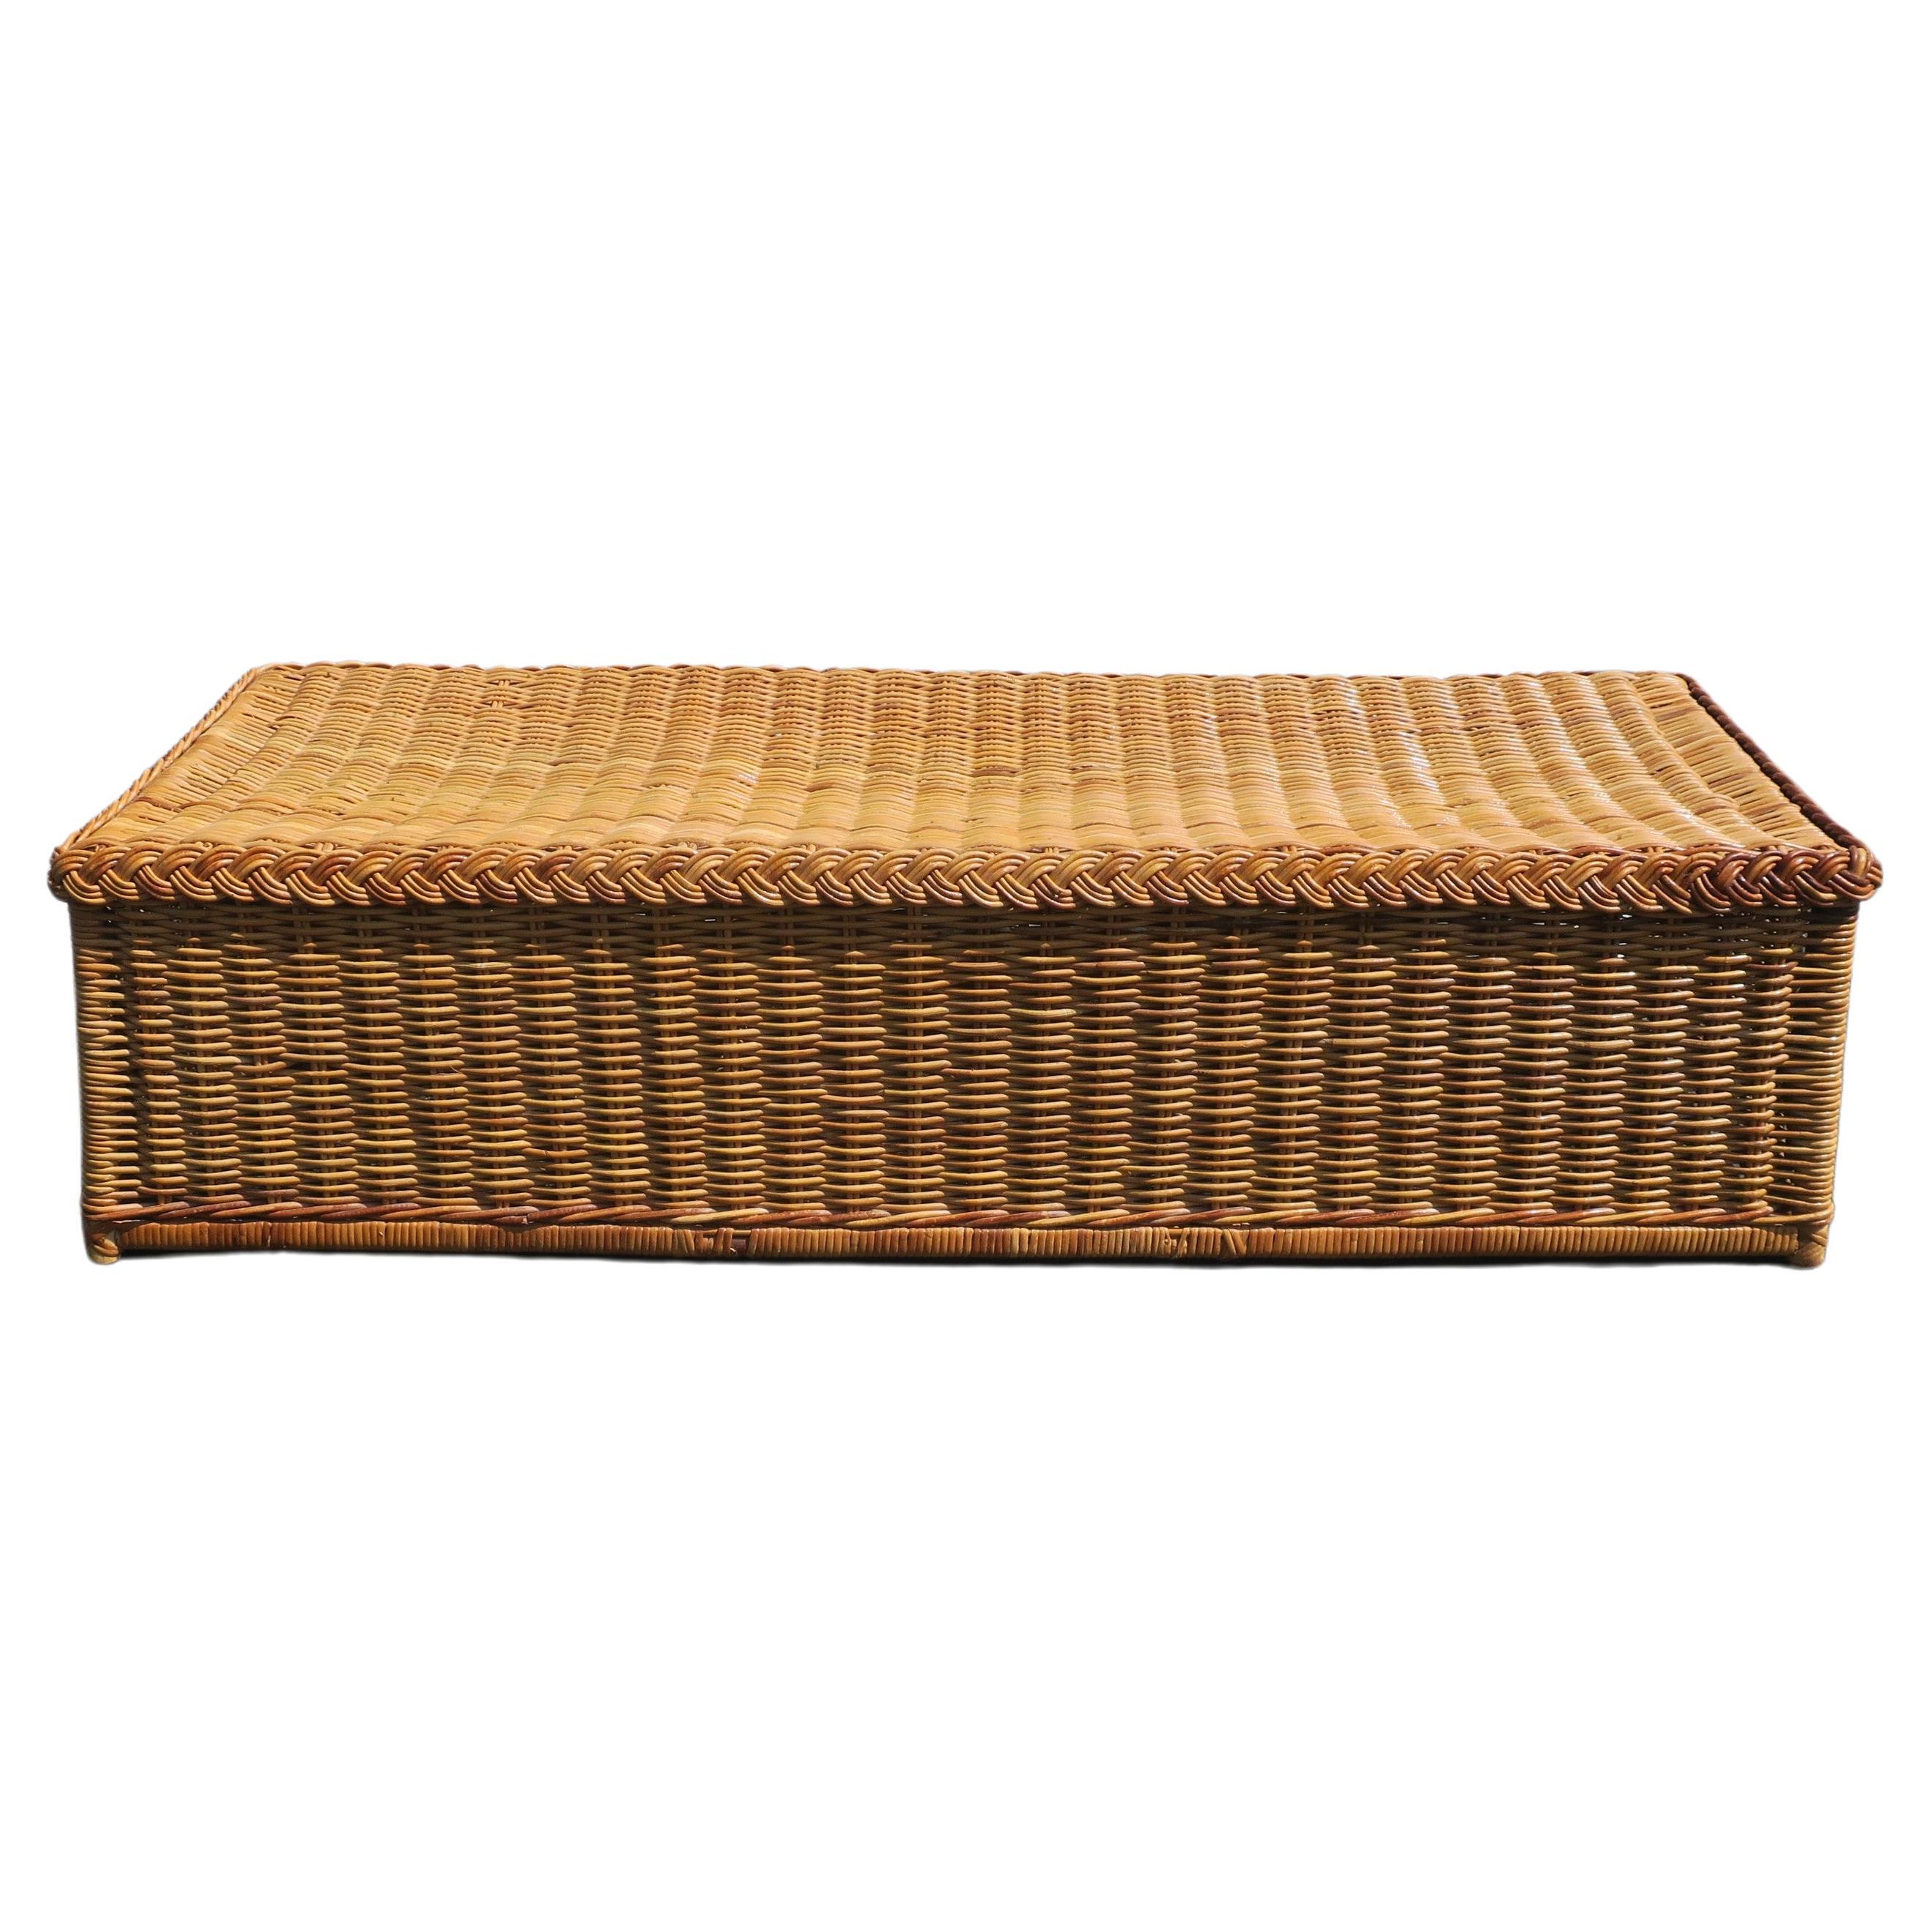 Wicker Bench or Ottoman For Sale